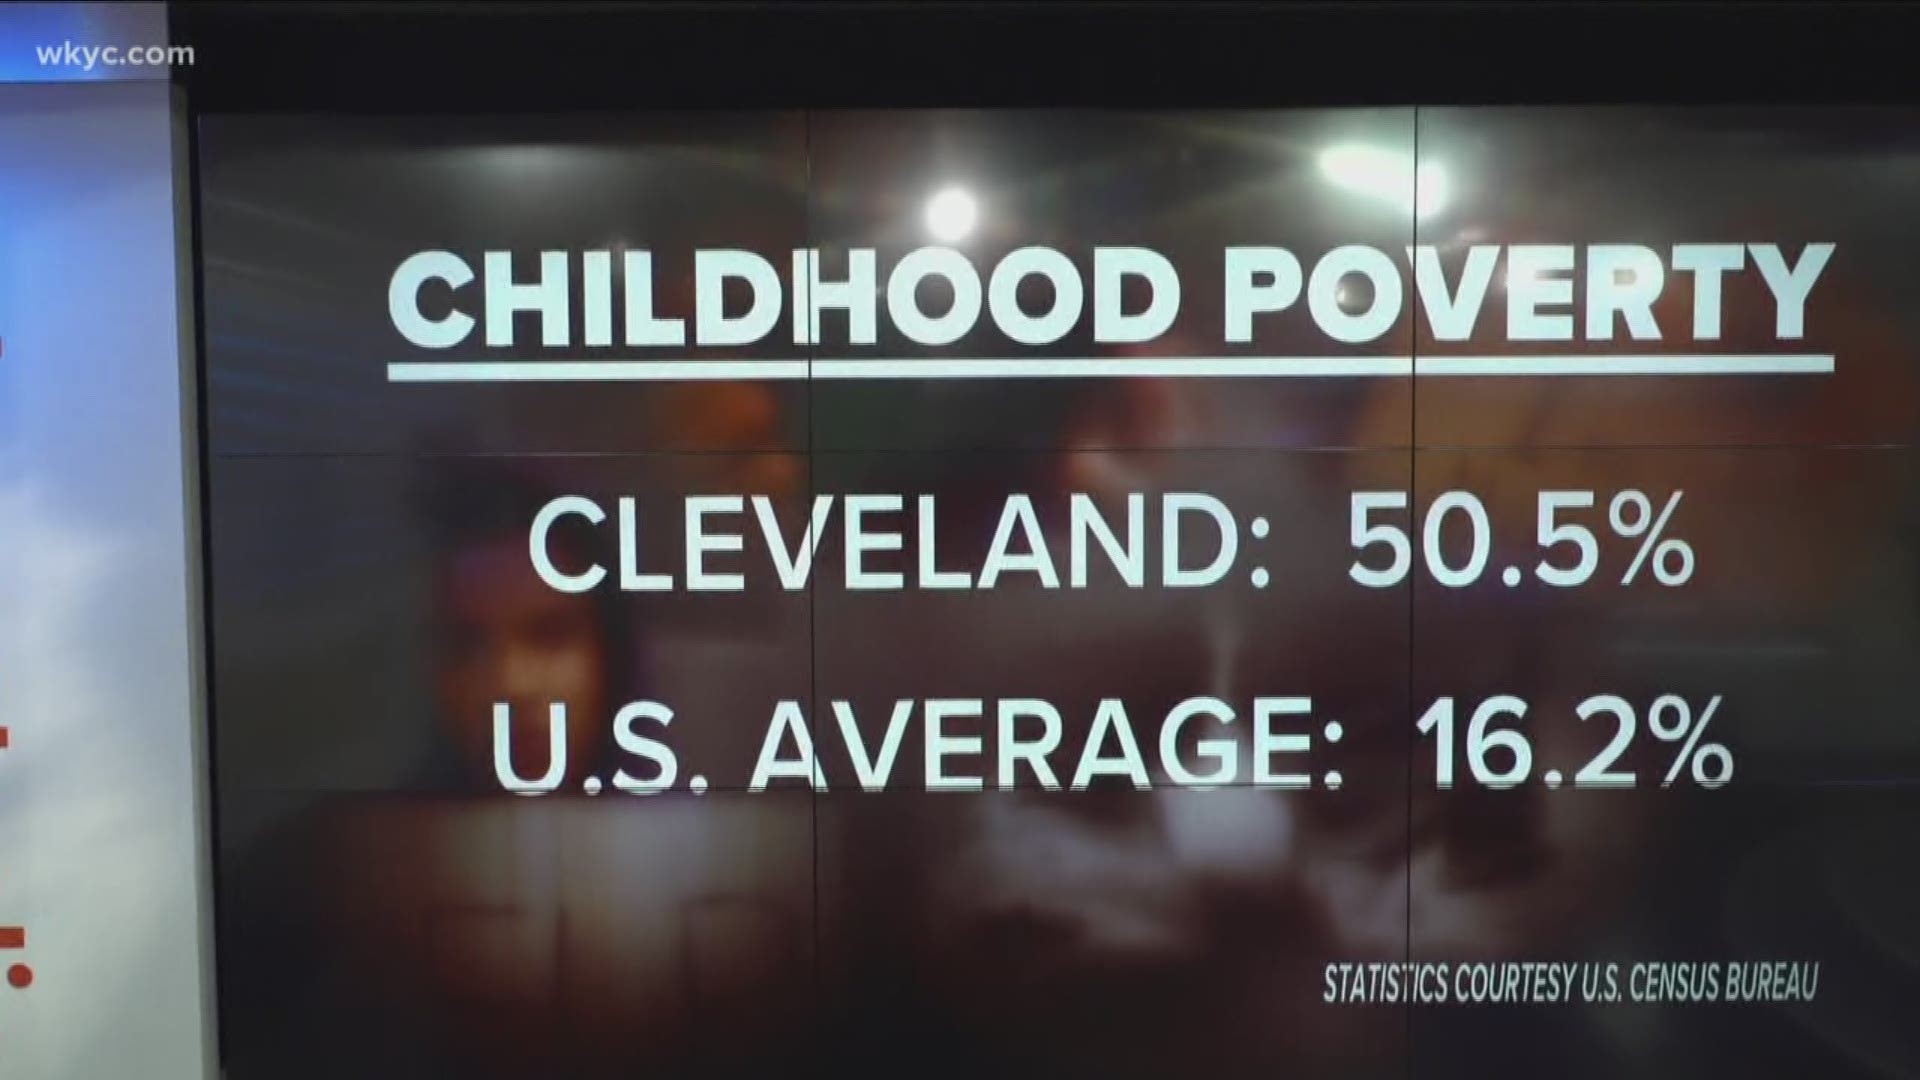 The most recent census information places the city's childhood poverty rate at more than 50%. That's way above the national average of 16%.